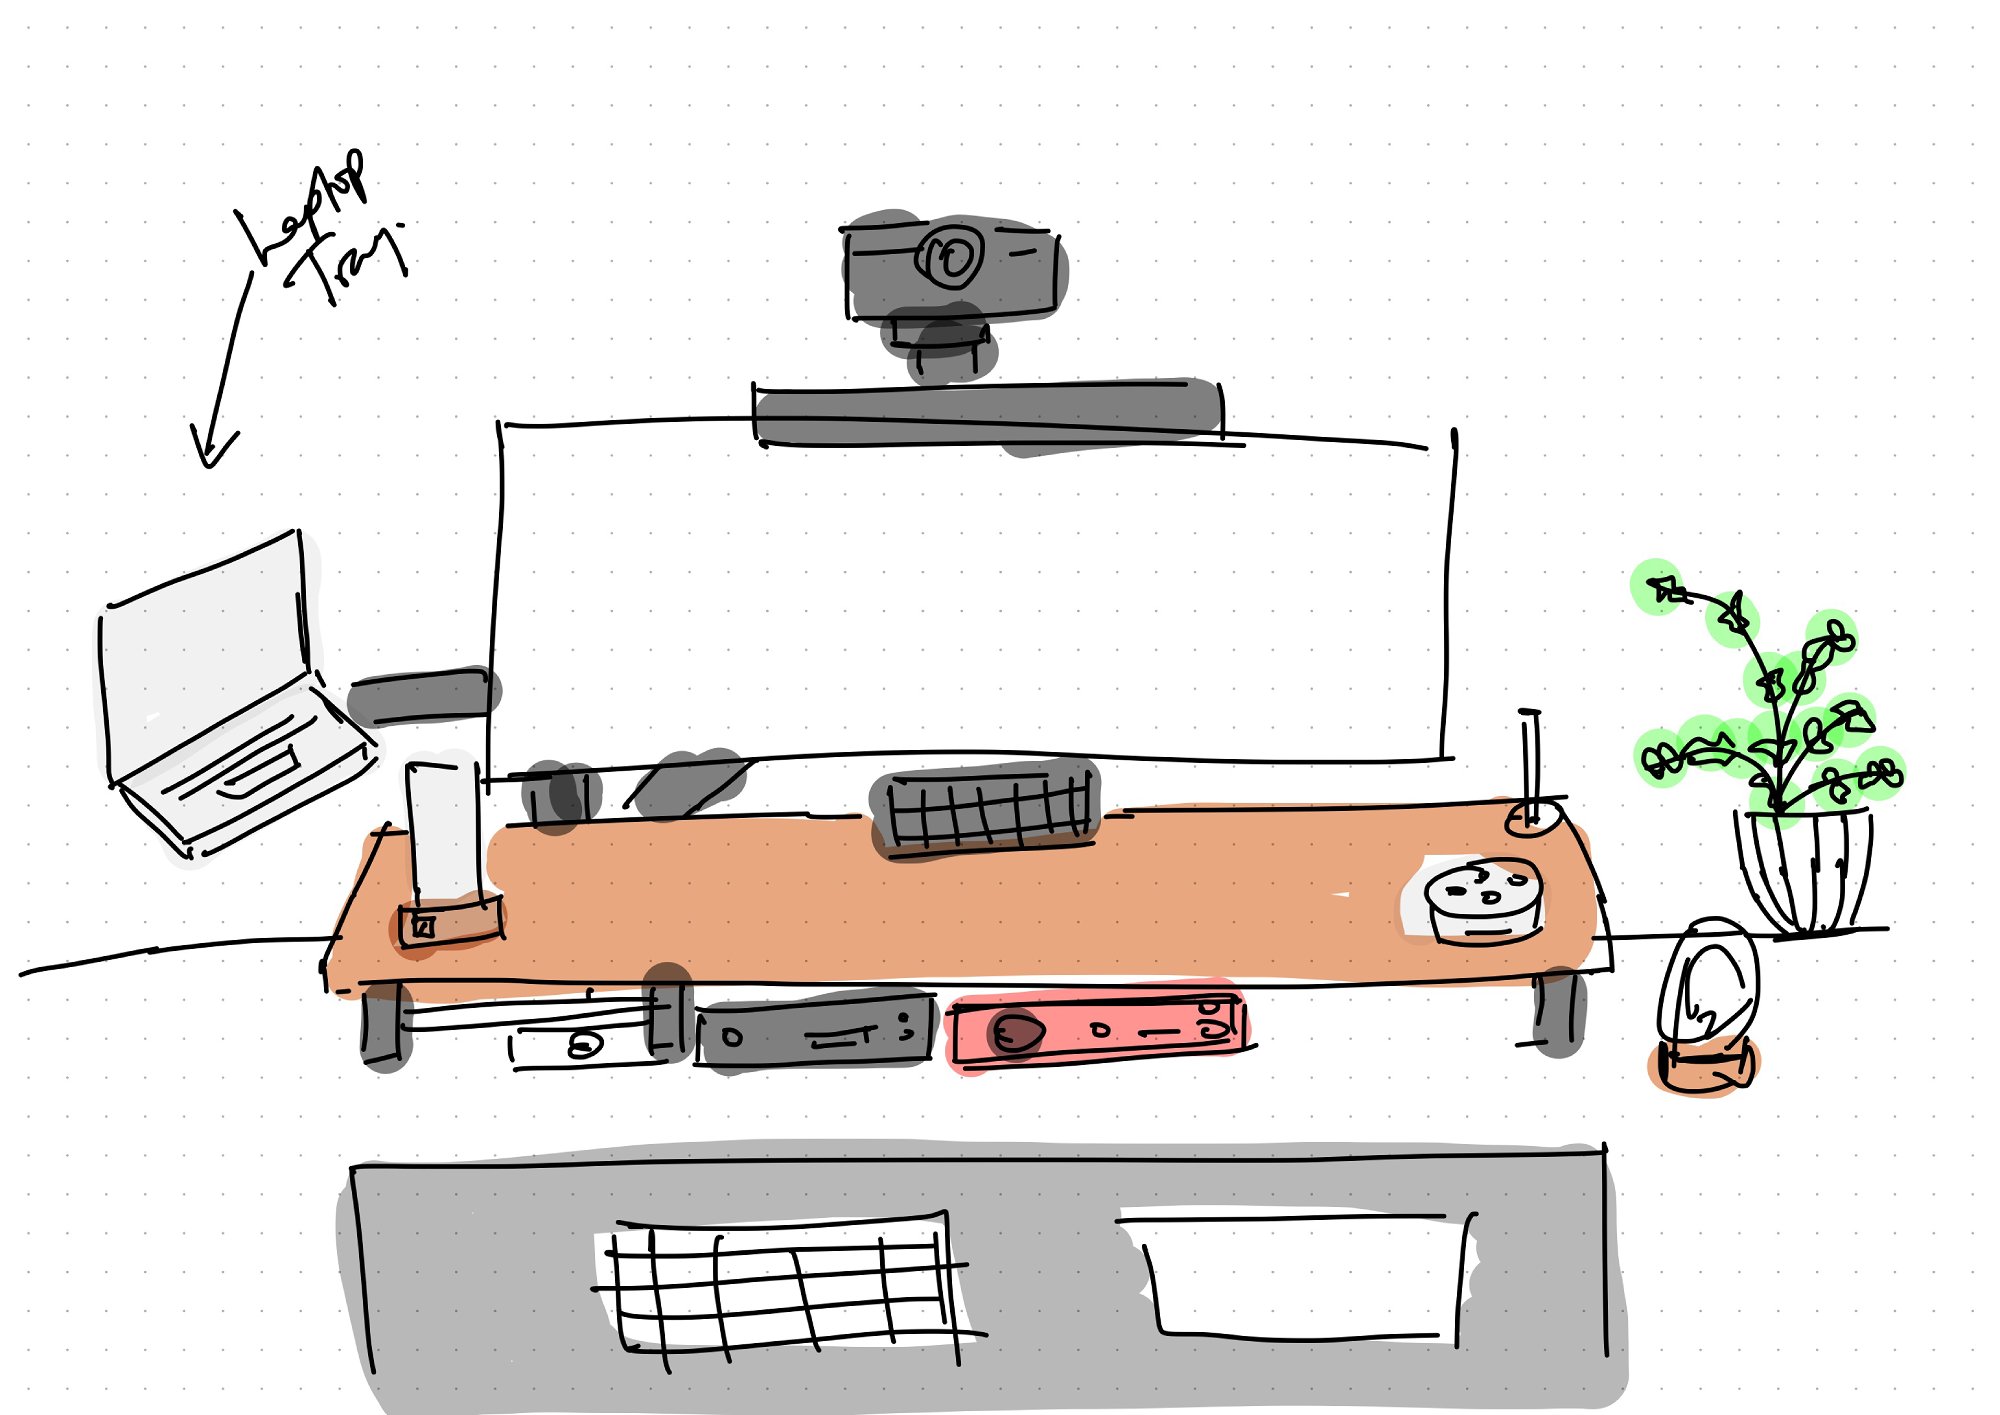 An illustration by Ogeh, depicting her envisioned layout for her future desk setup